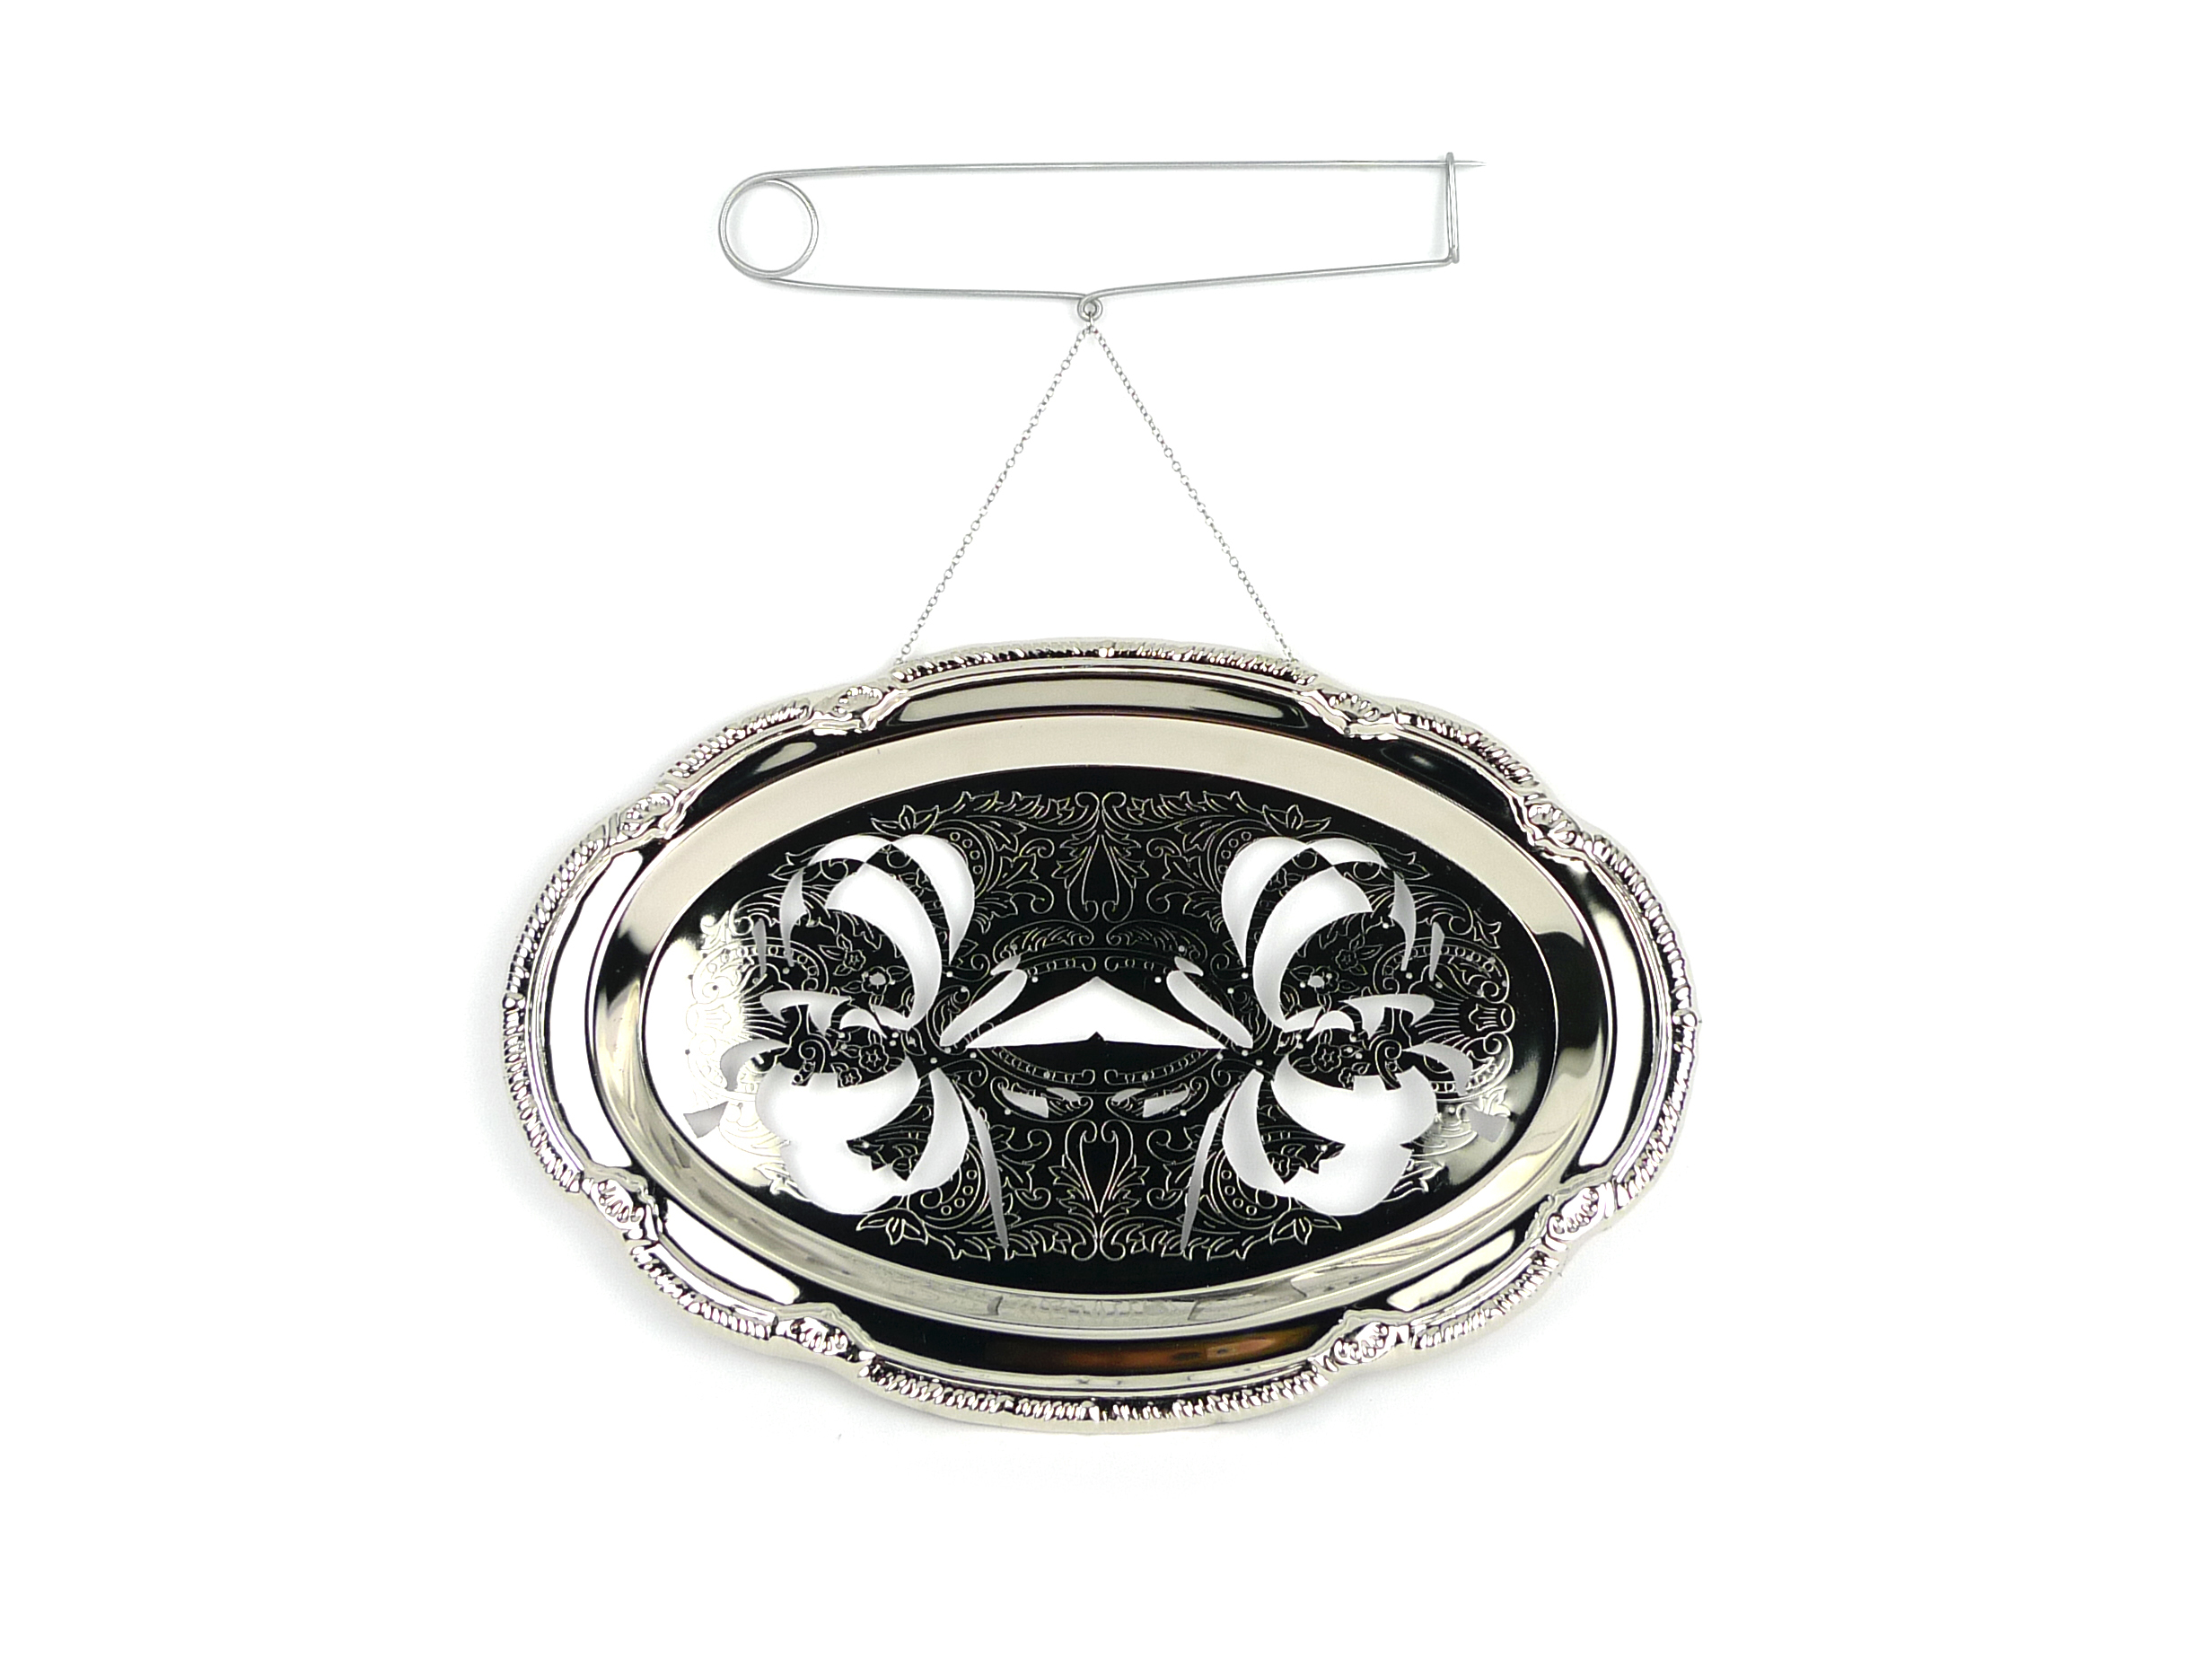 Melissa Cameron, Mirror Brooch (Body/Politic), Serving dish (chrome plated mild steel) titanium, stainless steel, 9.5 x 10 x 1 in.